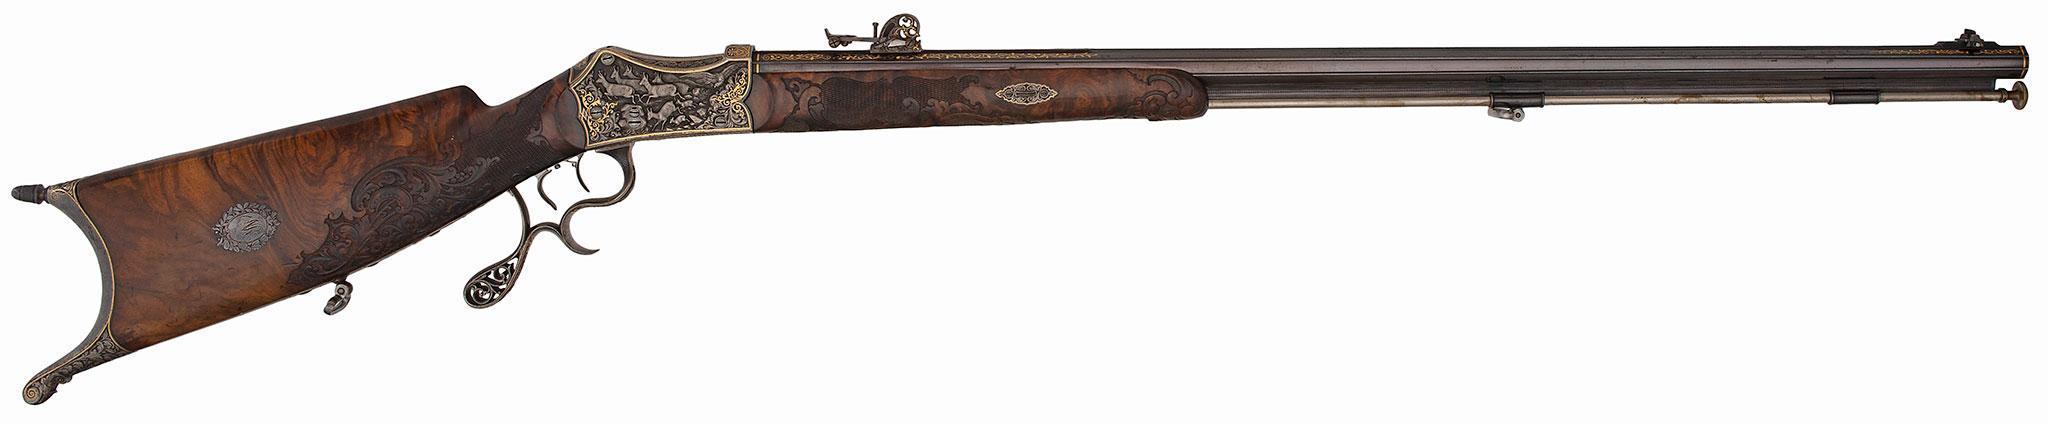 Magnificent Martini Action Relief Chiseled & Profusely Gold Inlaid Schuetzen Rifle Made In Germany